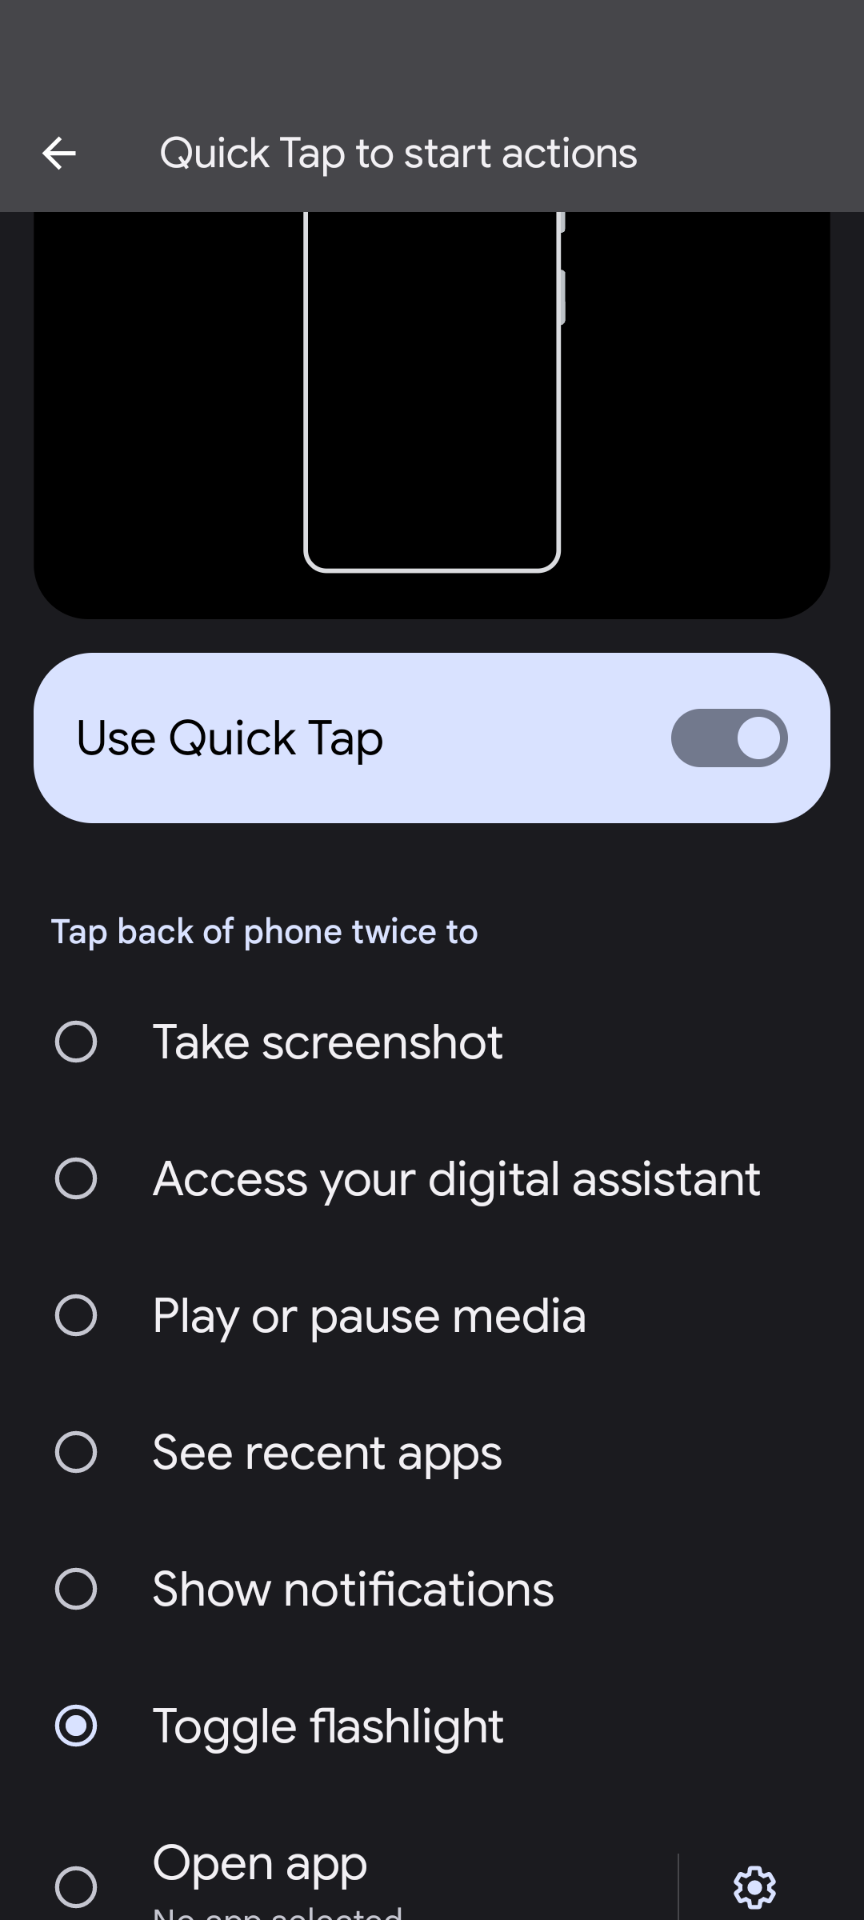 Tapping on locked bots or clicking Choose does NOTHING. Any way to